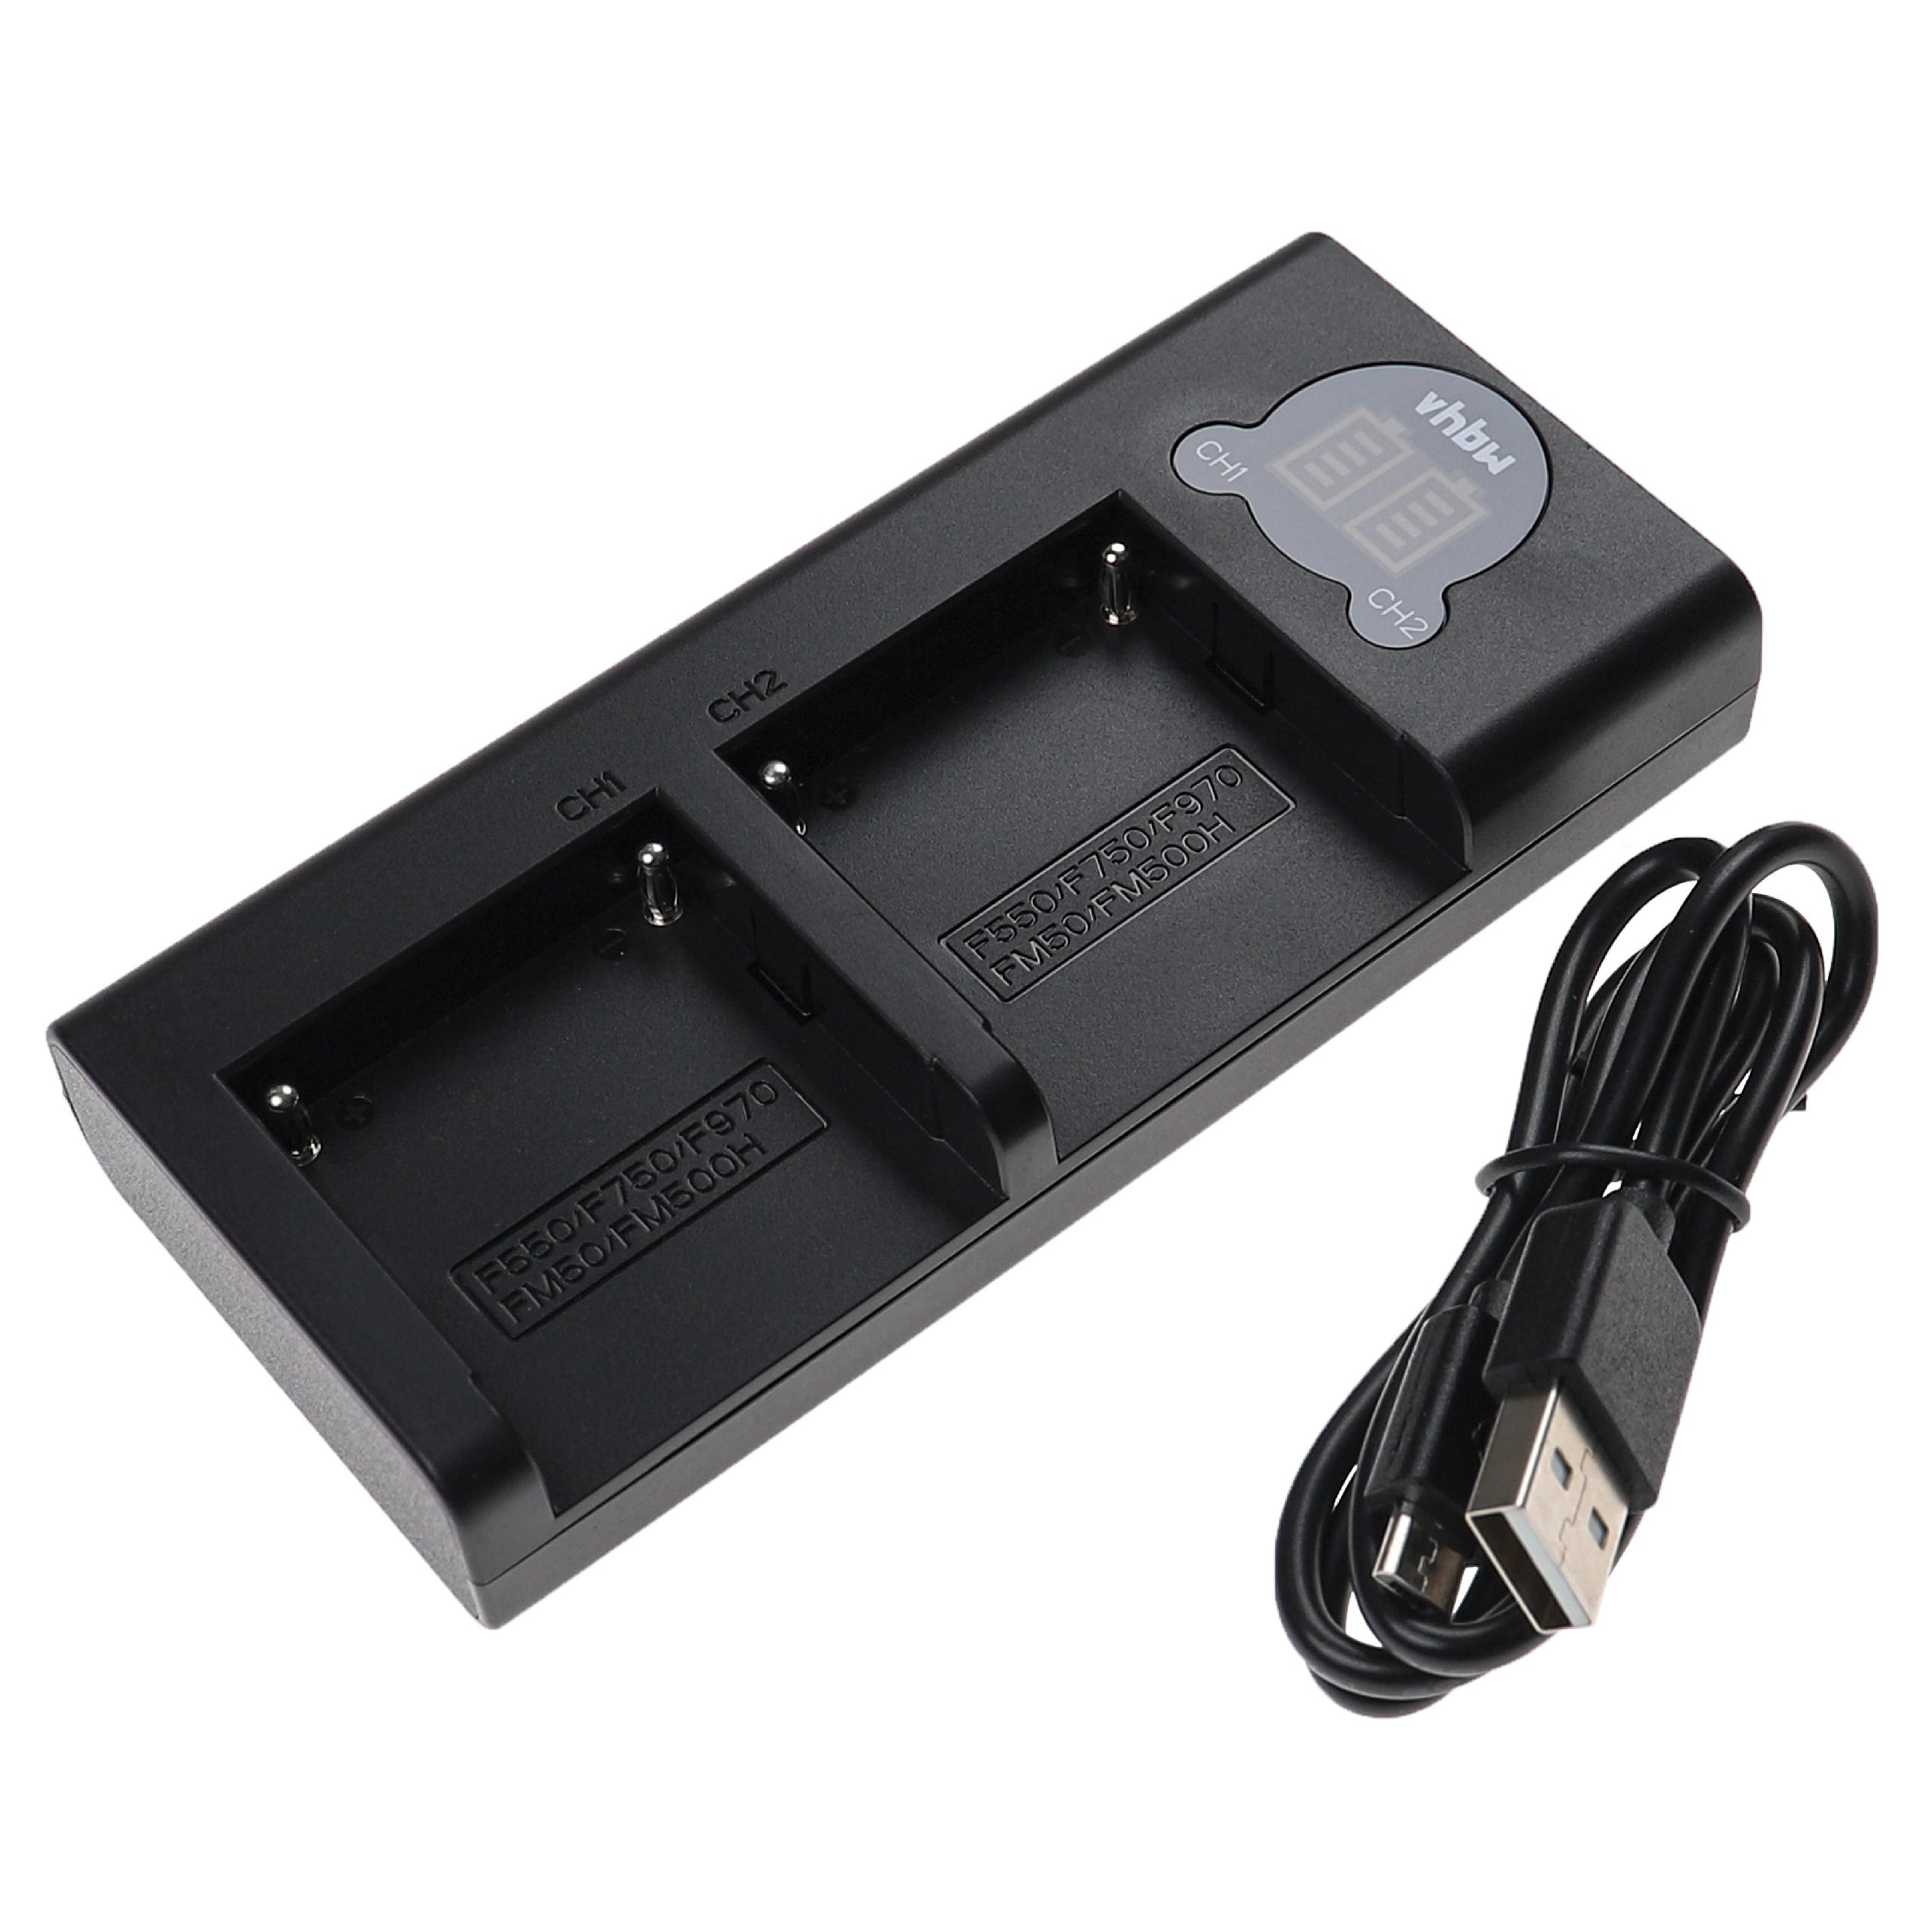 Battery Charger suitable for Panasonic VW-VBD1E Camera etc. 